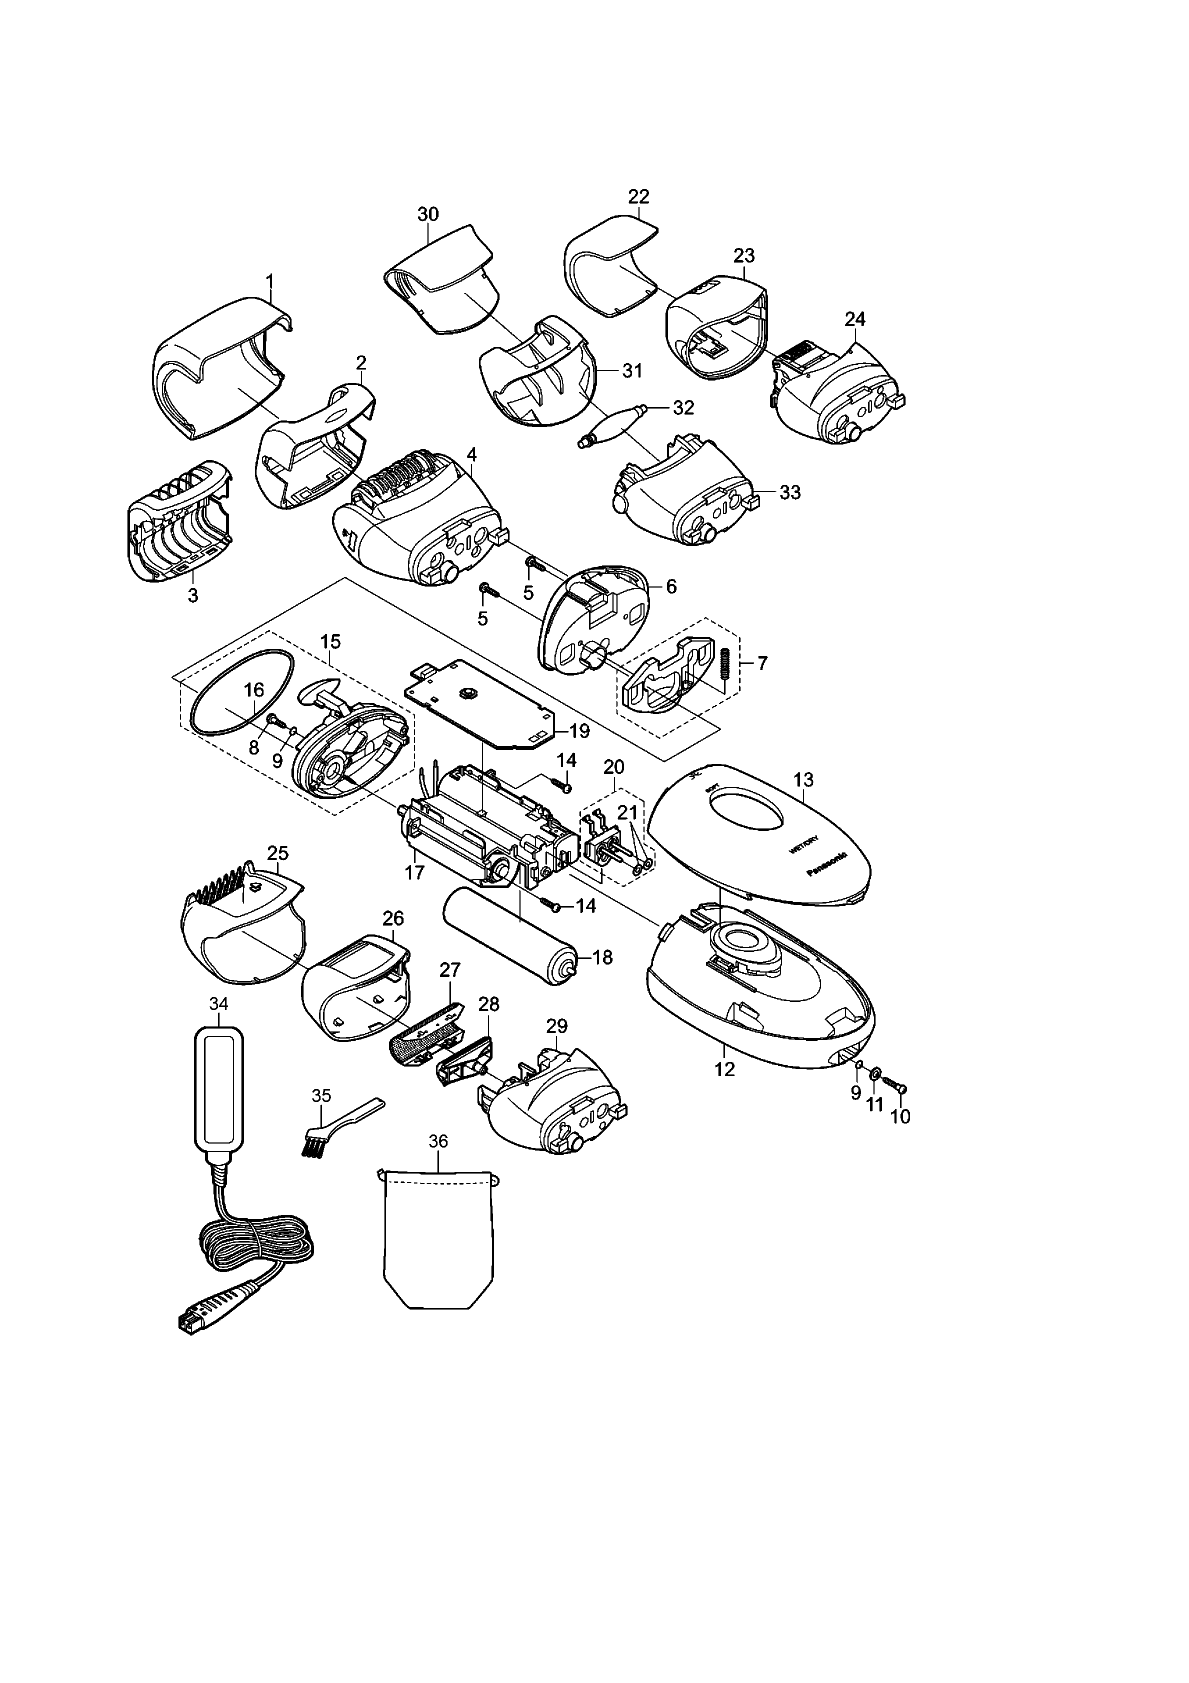 ES-ED22: Exploded View